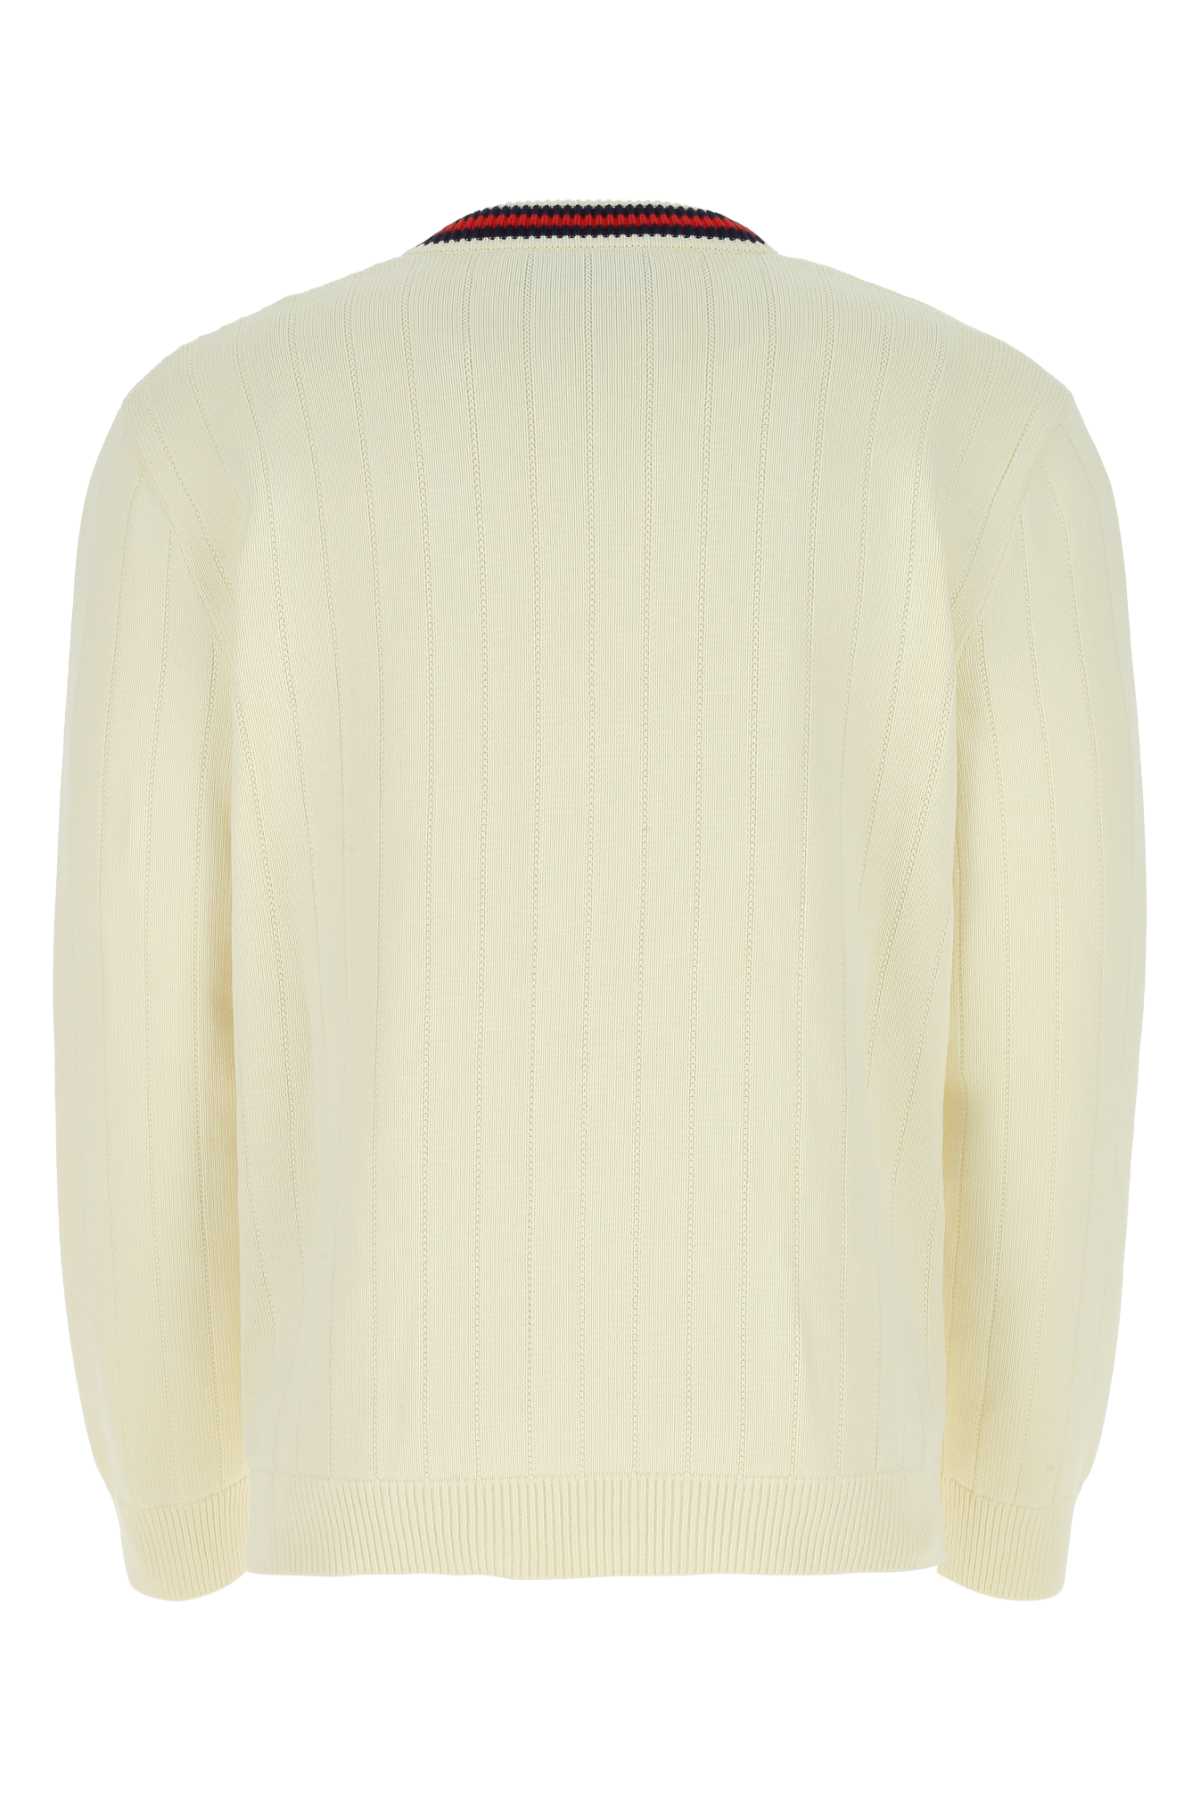 Gucci Ivory Cotton Oversize Cardigan In 9182